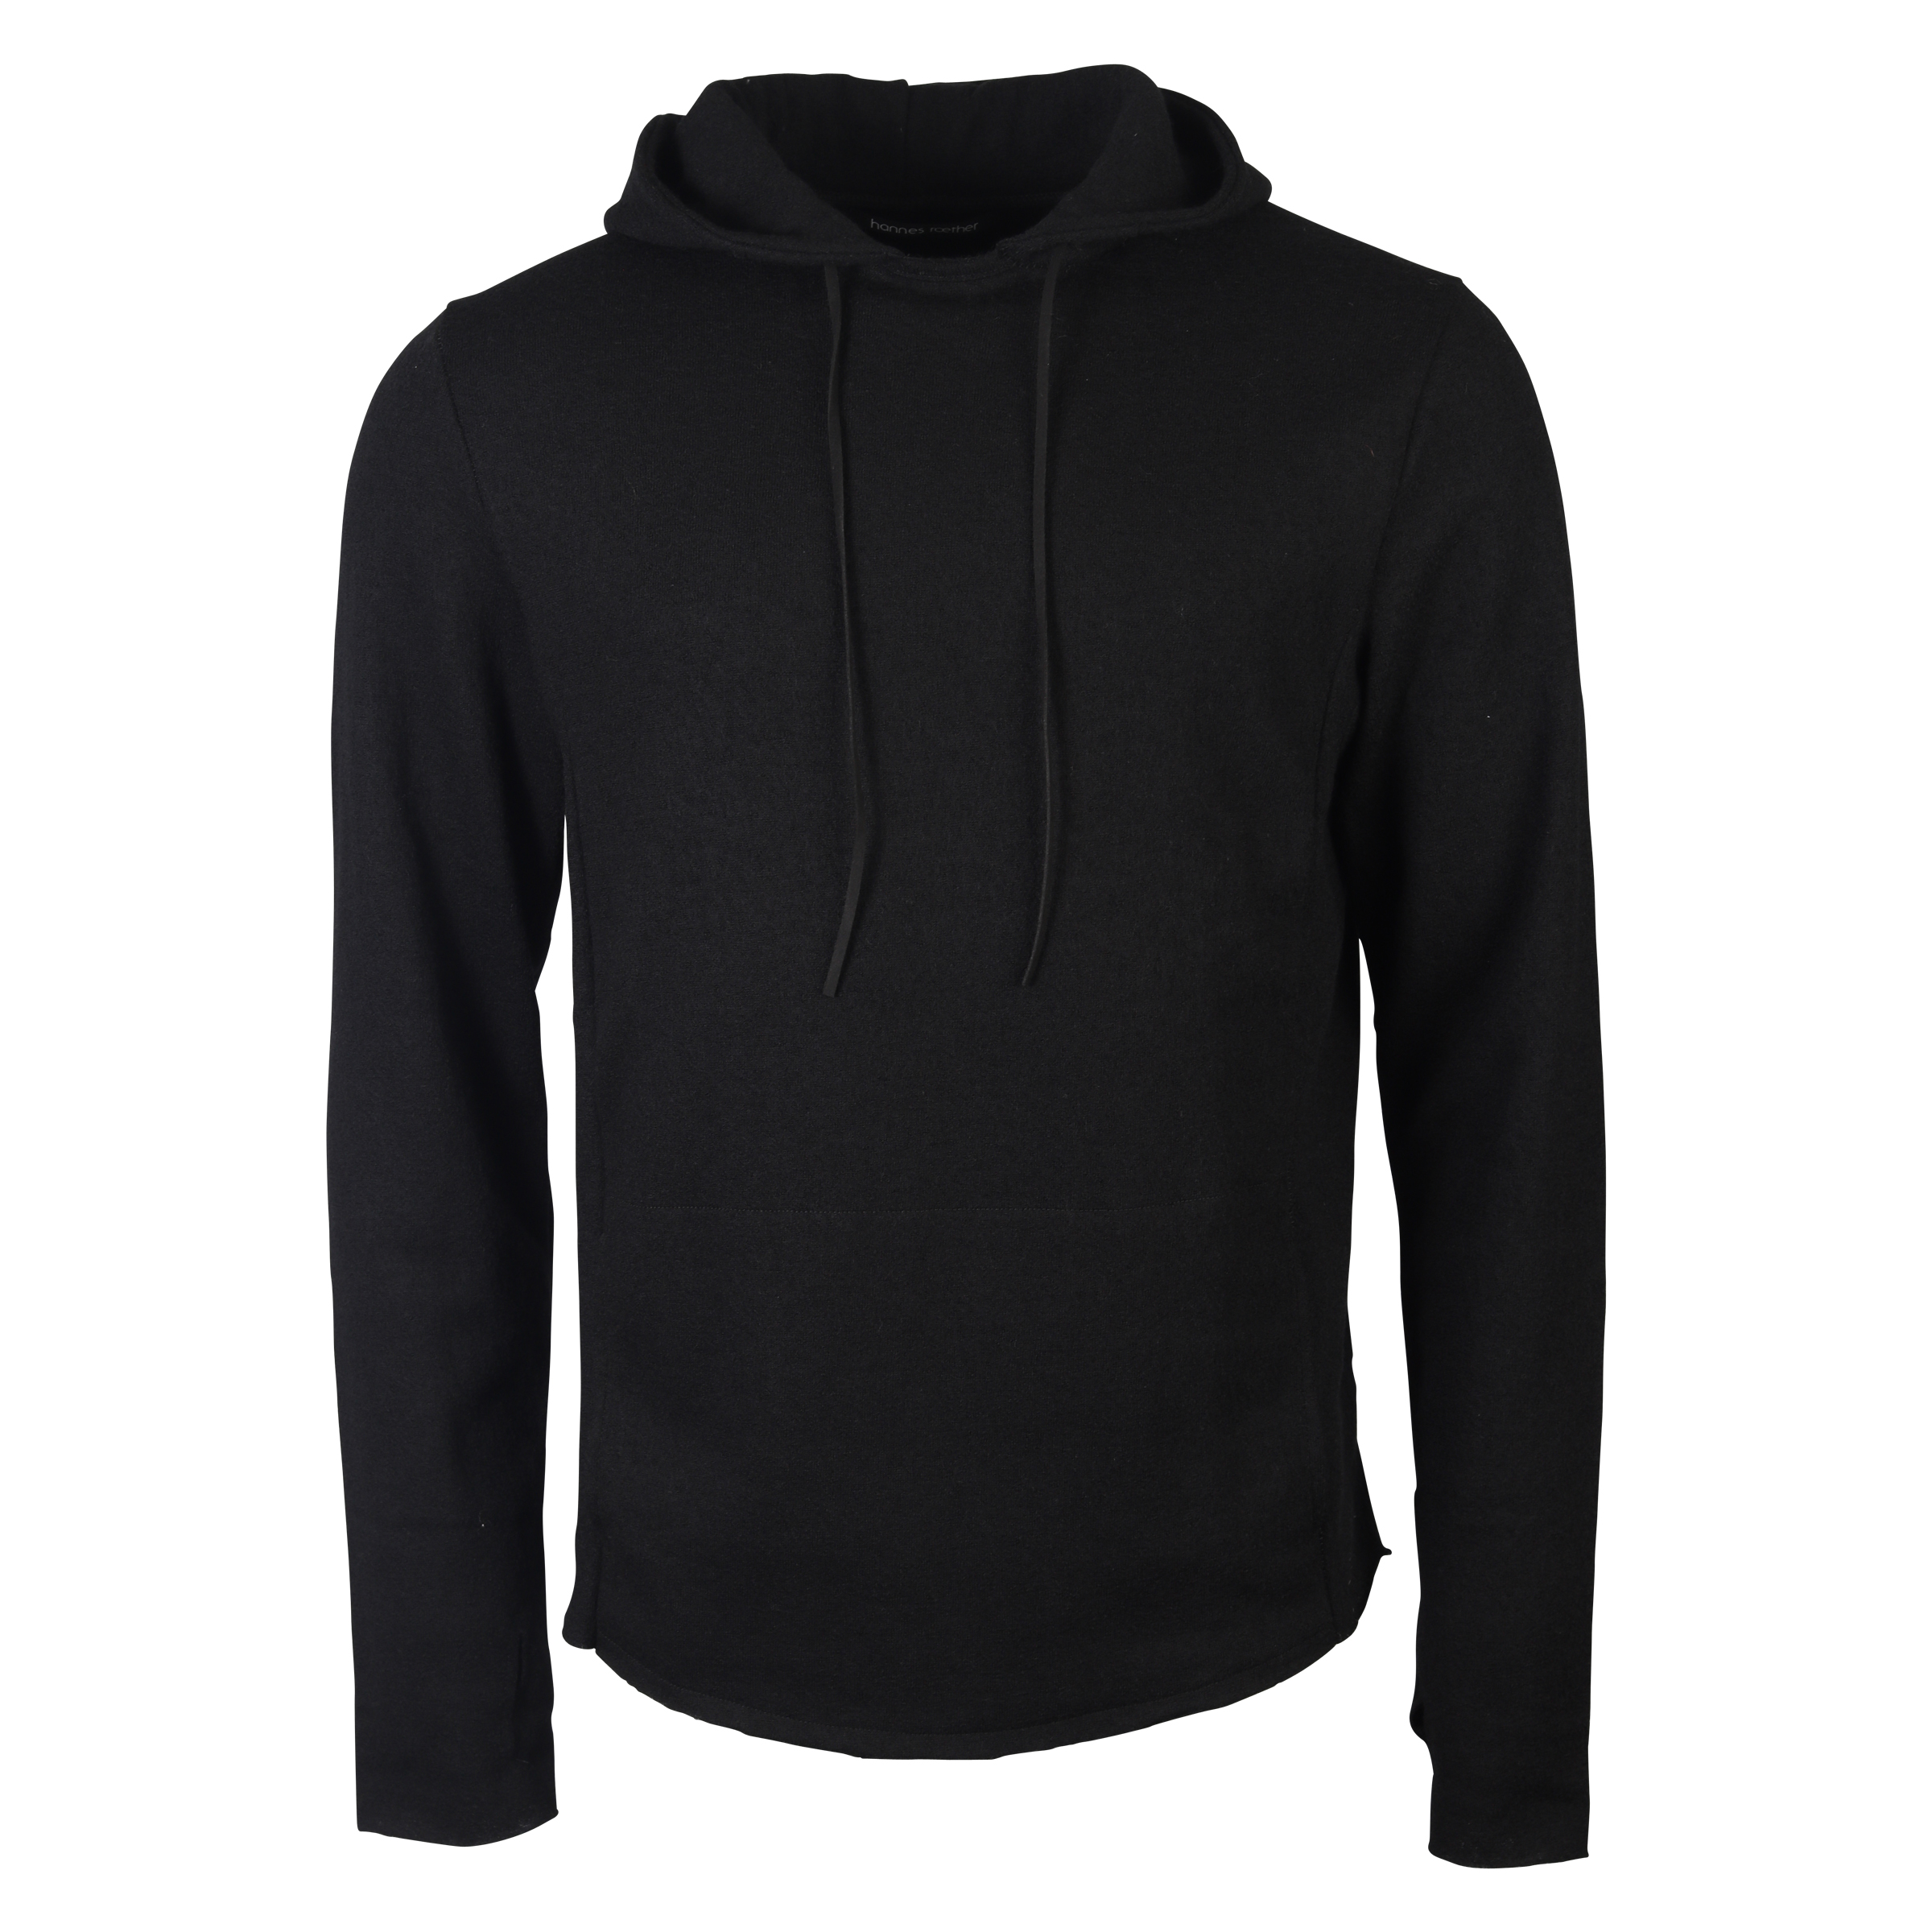 Hannes Roether Hooded Knit Sweater Black